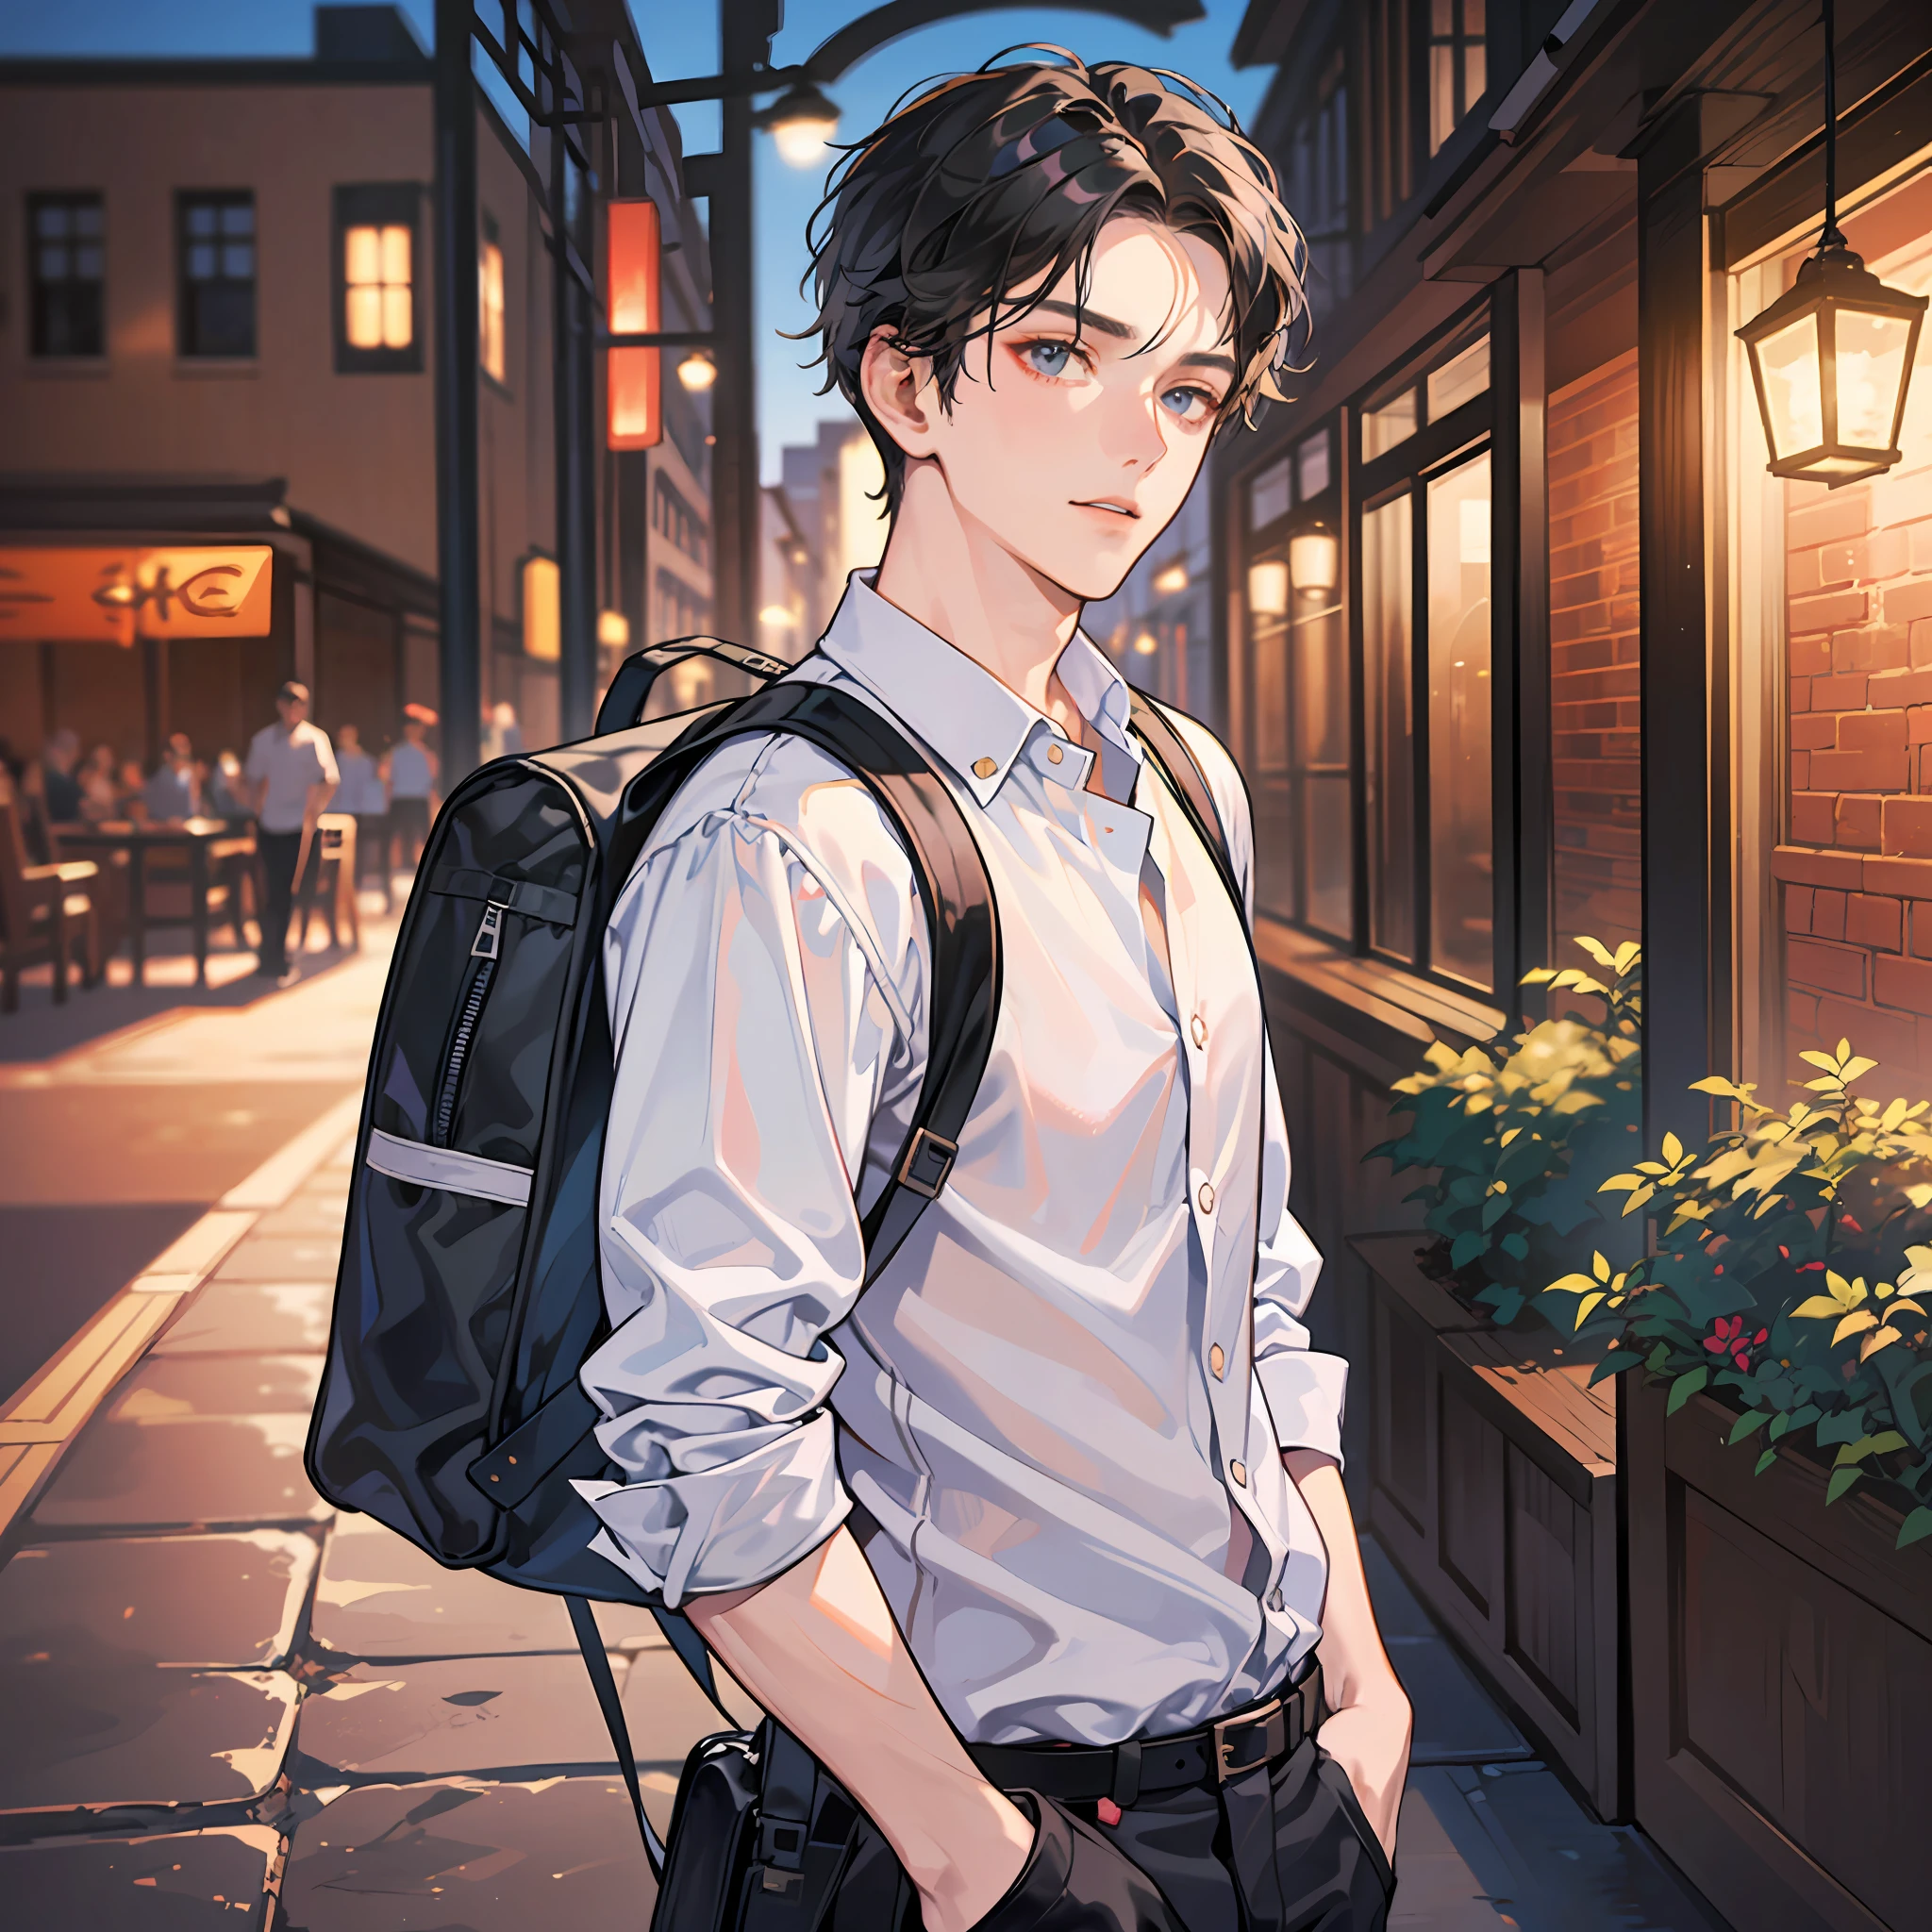 (Handsome man: 1.4), wearing a white shirt, short black hair, delicate face, fair skin, backpack (at the entrance of the barbecue restaurant at night: 1.4), 8K HD, deserted no one, master masterpiece - high-quality images, exquisite